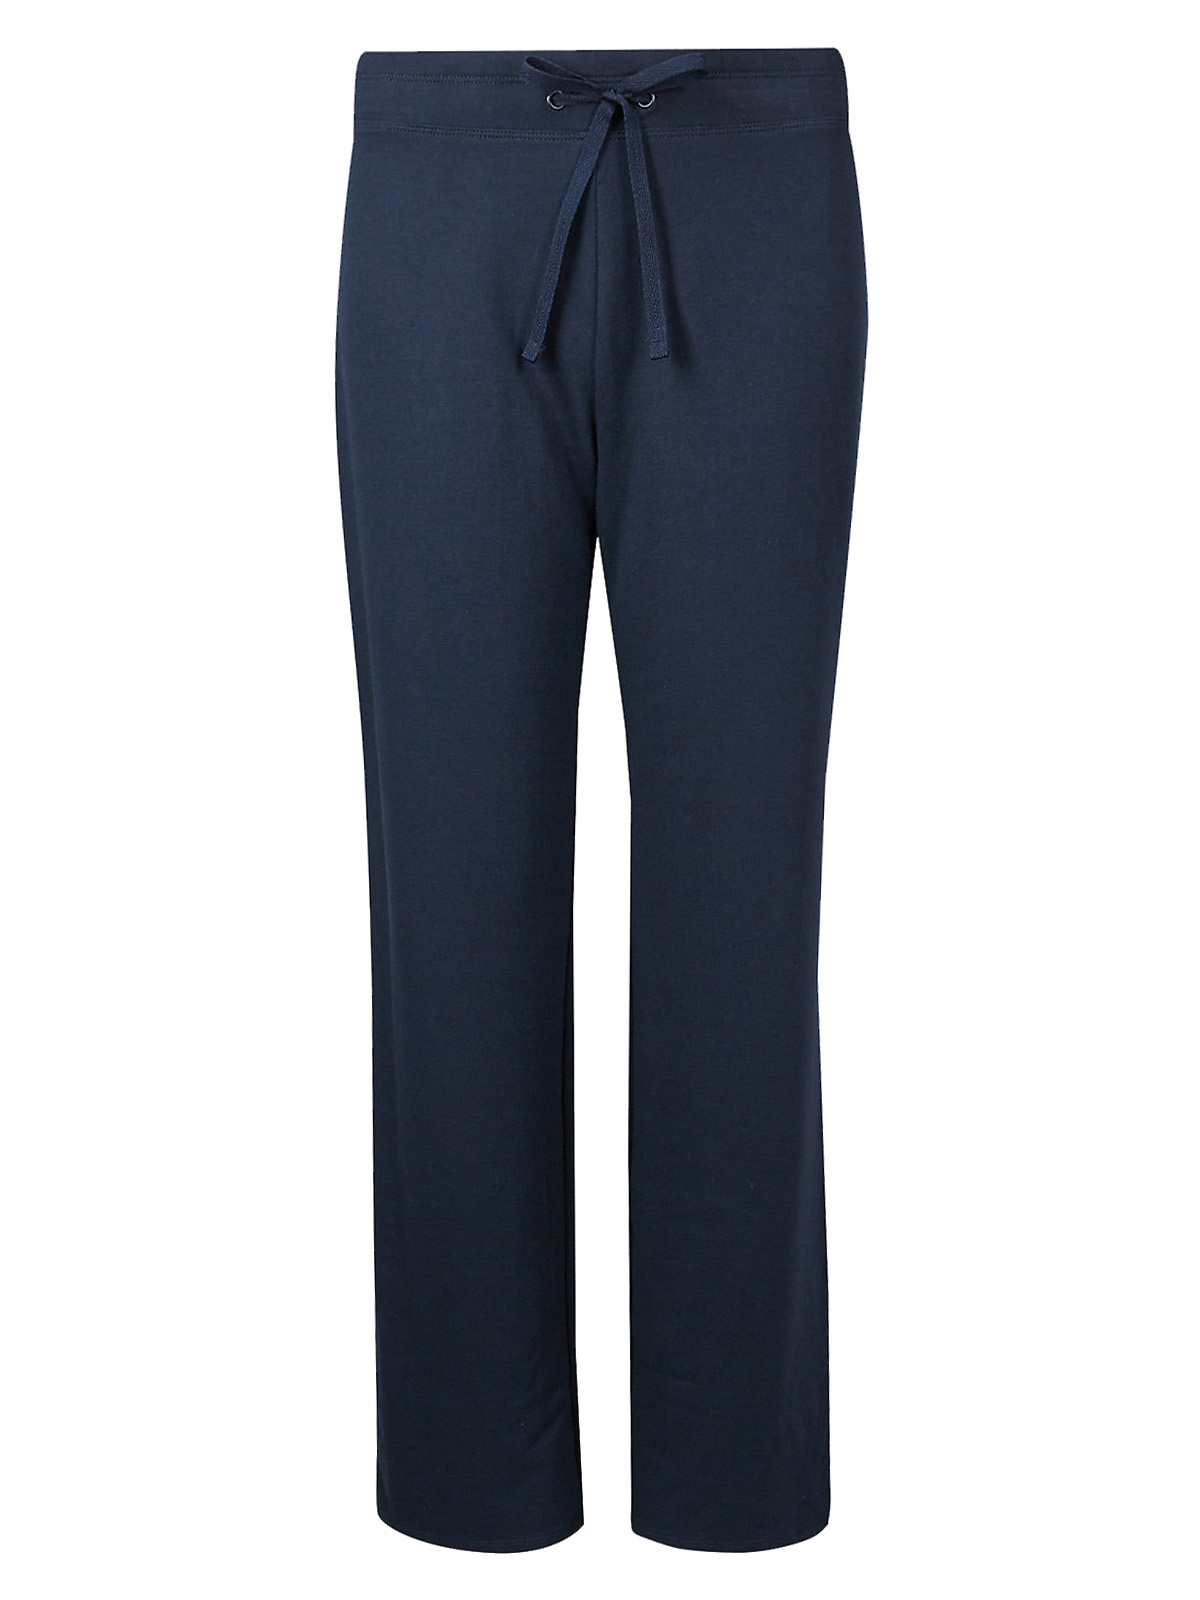 Marks and Spencer - - M&5 NAVY Cotton Rich Straight Leg Joggers - Size ...